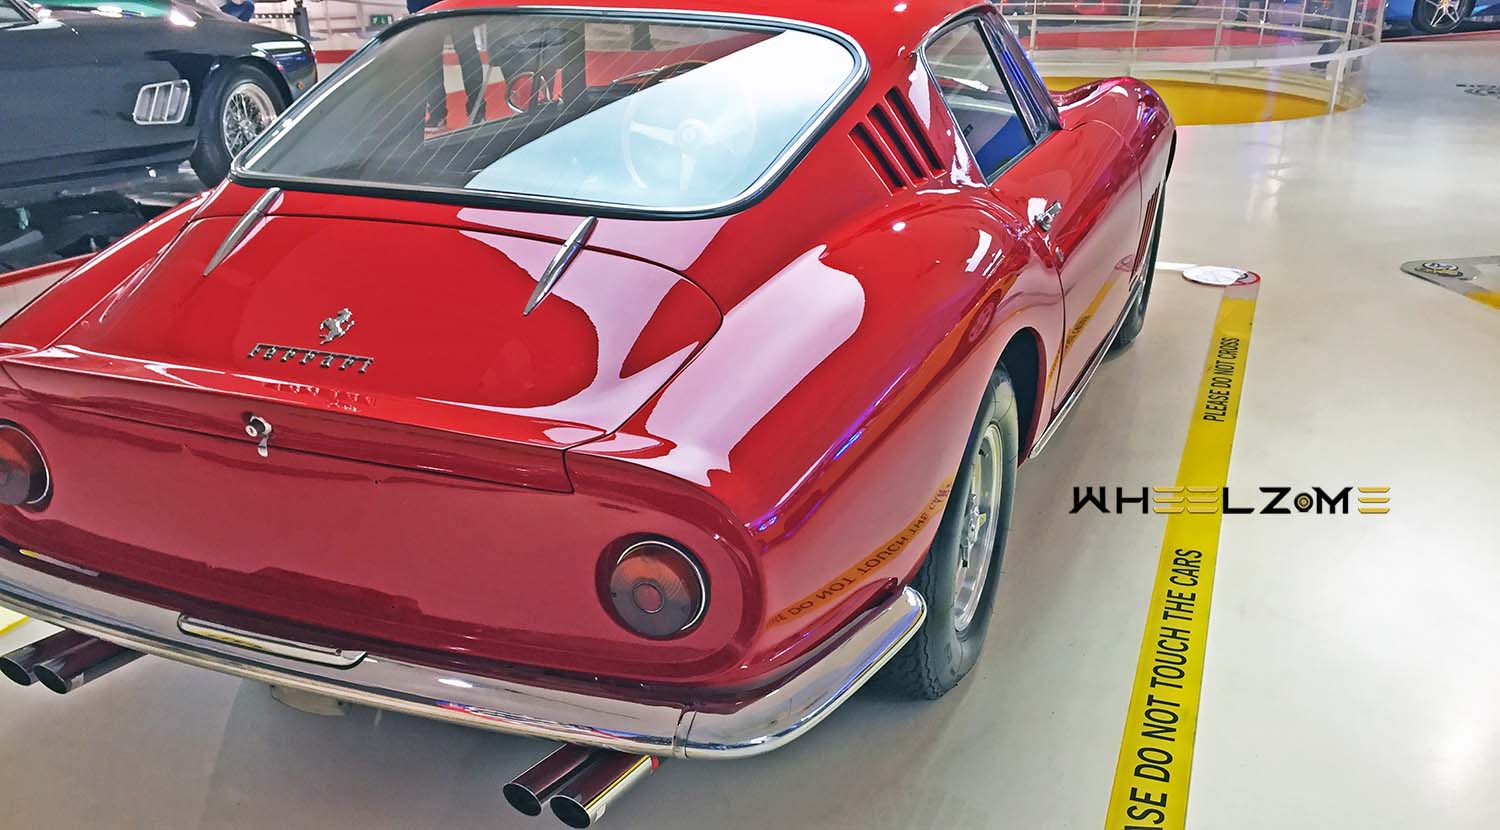 Ferrari 275 GTB – One Of The Most Iconic Collectible Cars